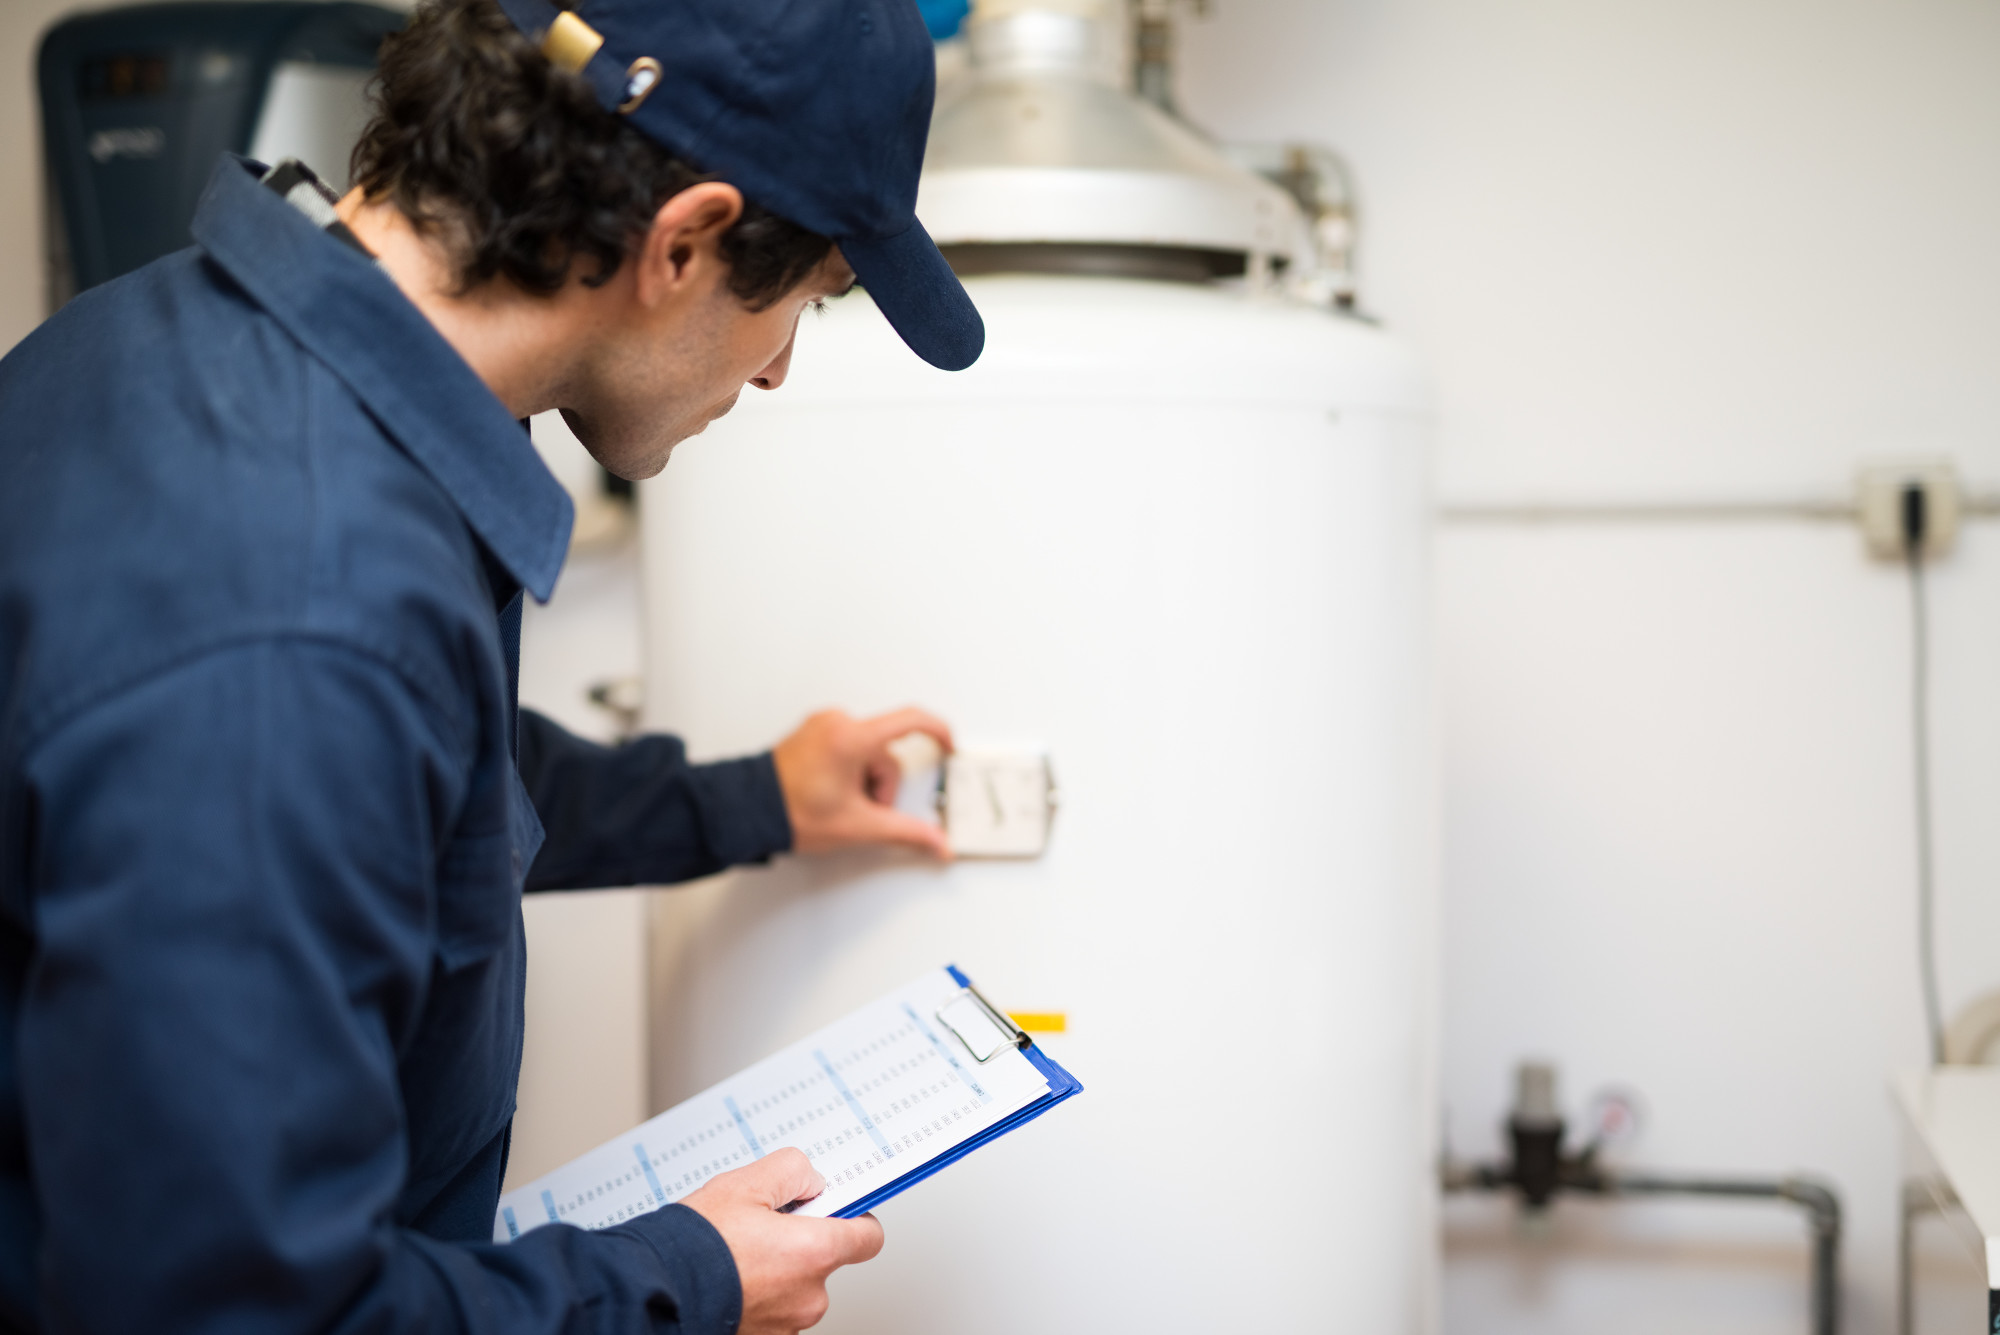 Are you looking for a reliable water heater company? Click here for five questions you should ask when hiring water heater services.